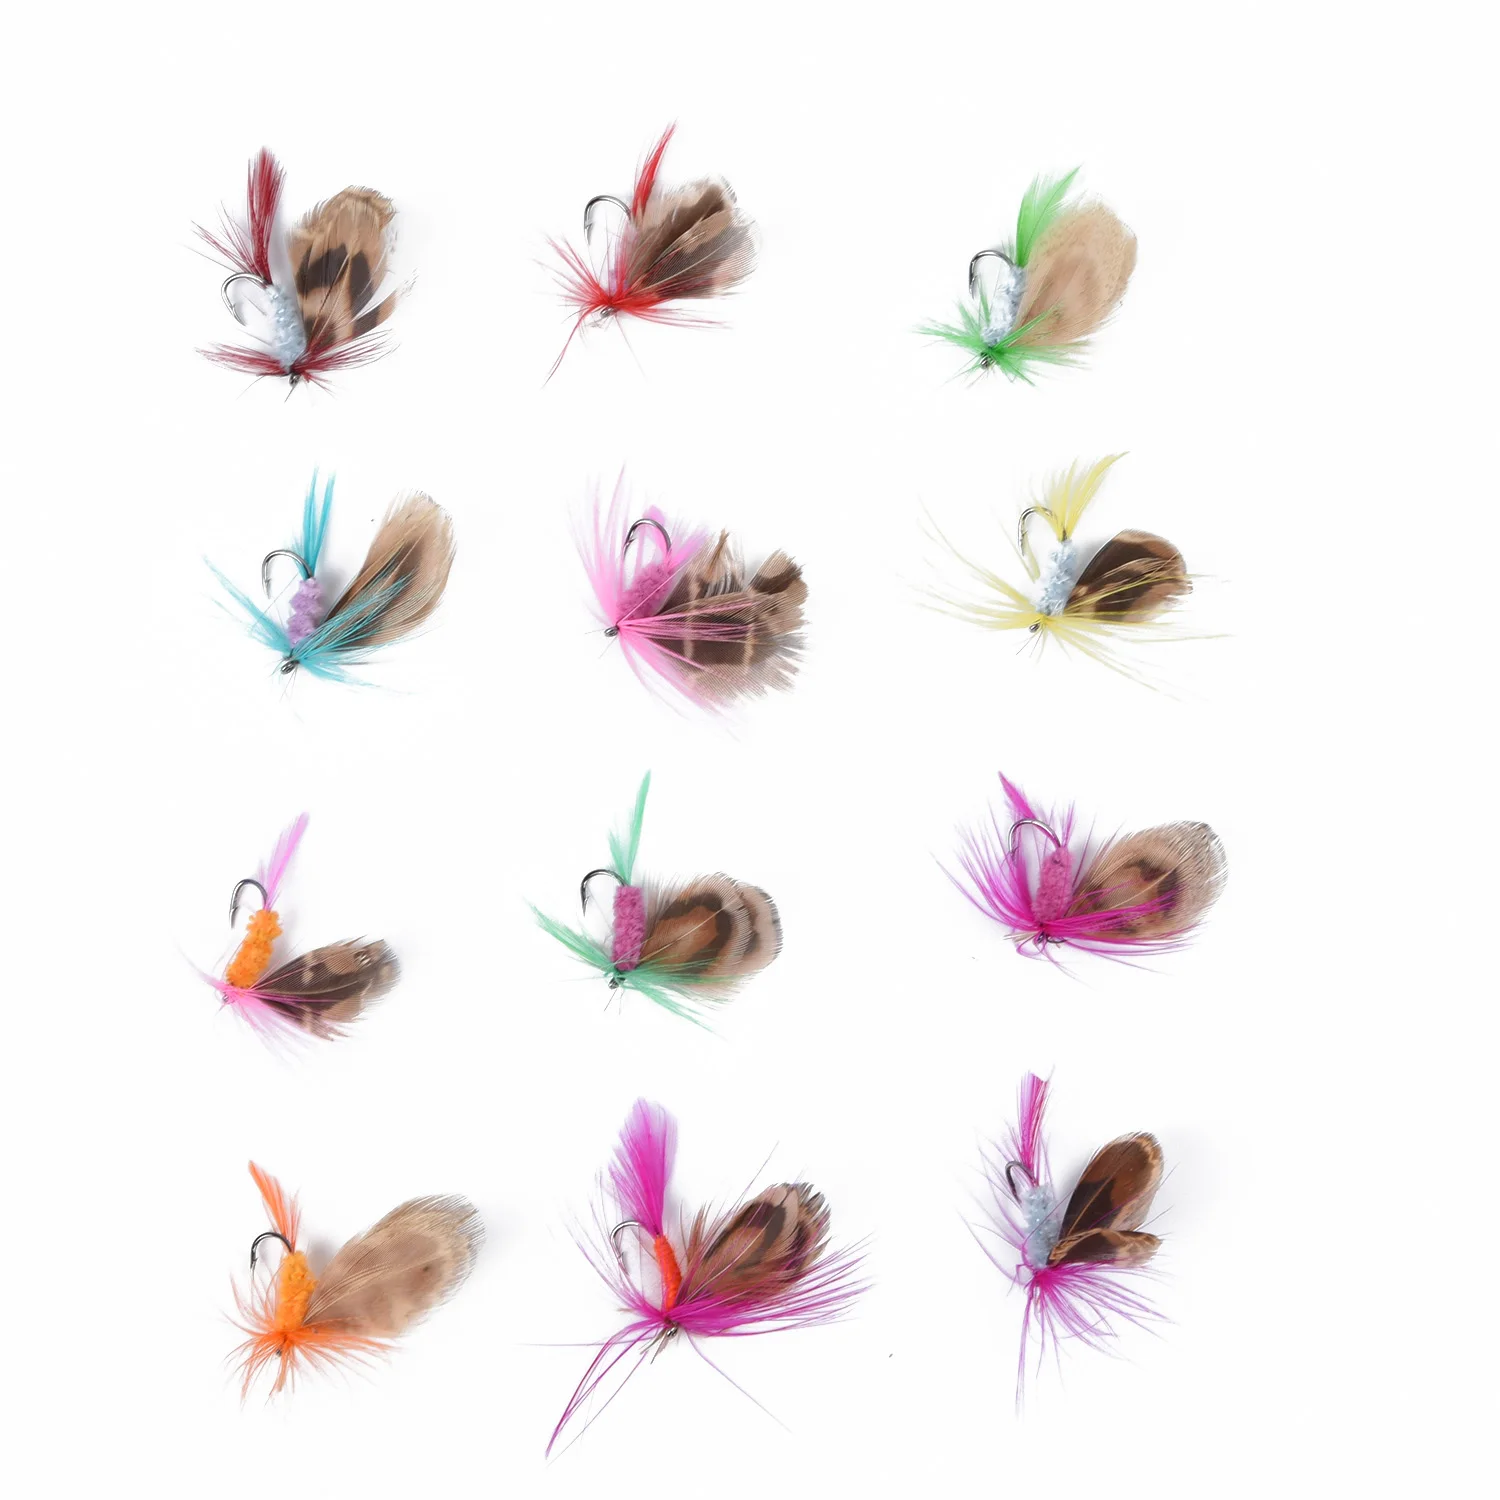 

12pcs/set 2cm Insects Flies Fly Fishing Lures Baits Fishhook Popper Sharpened Crank Hooks Bait Pesca Iscas Fish Tackle Tools